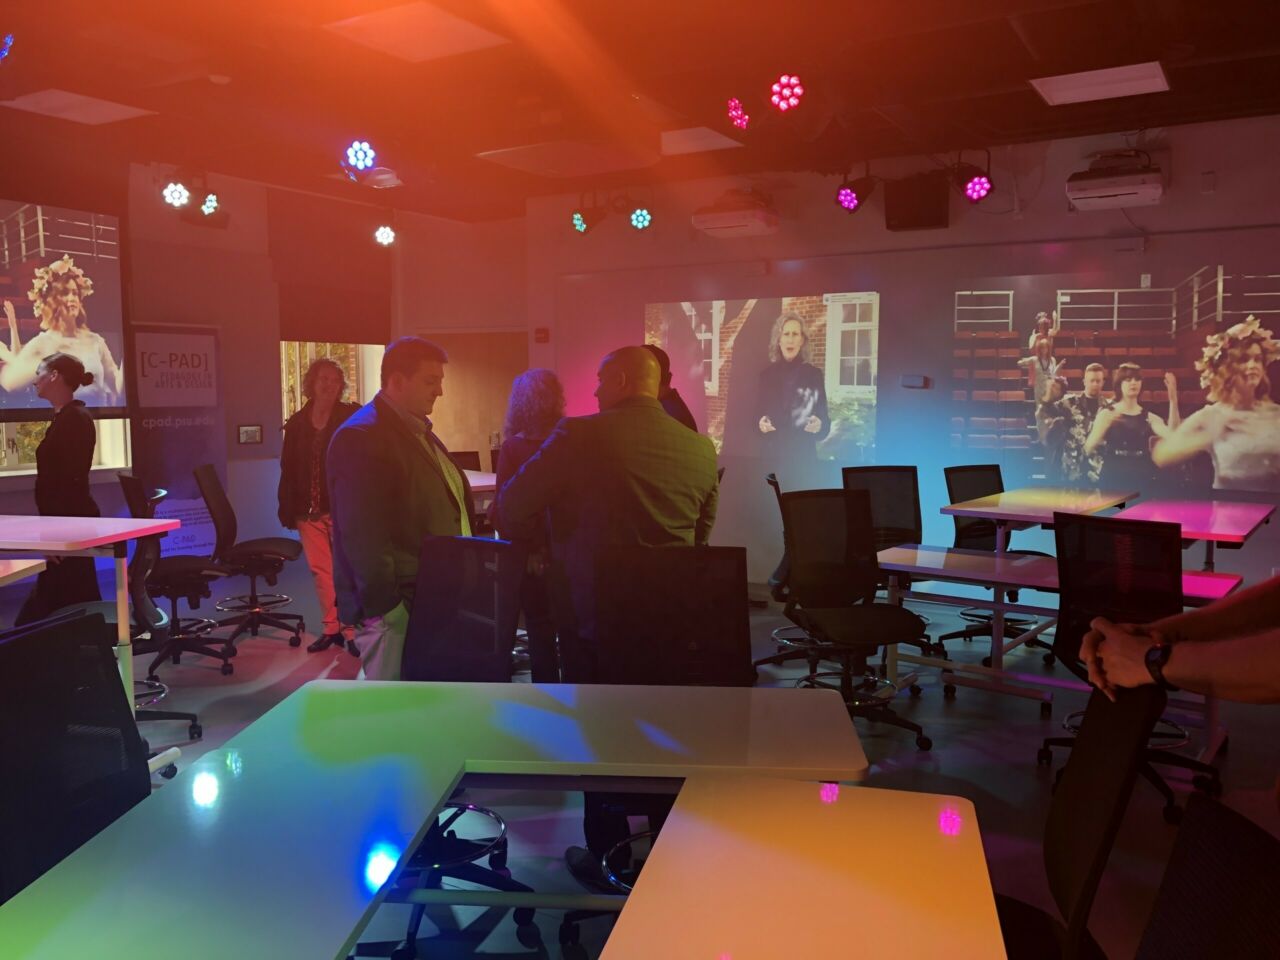 white tables and black desk chairs, people in business wear talking under colorful lights